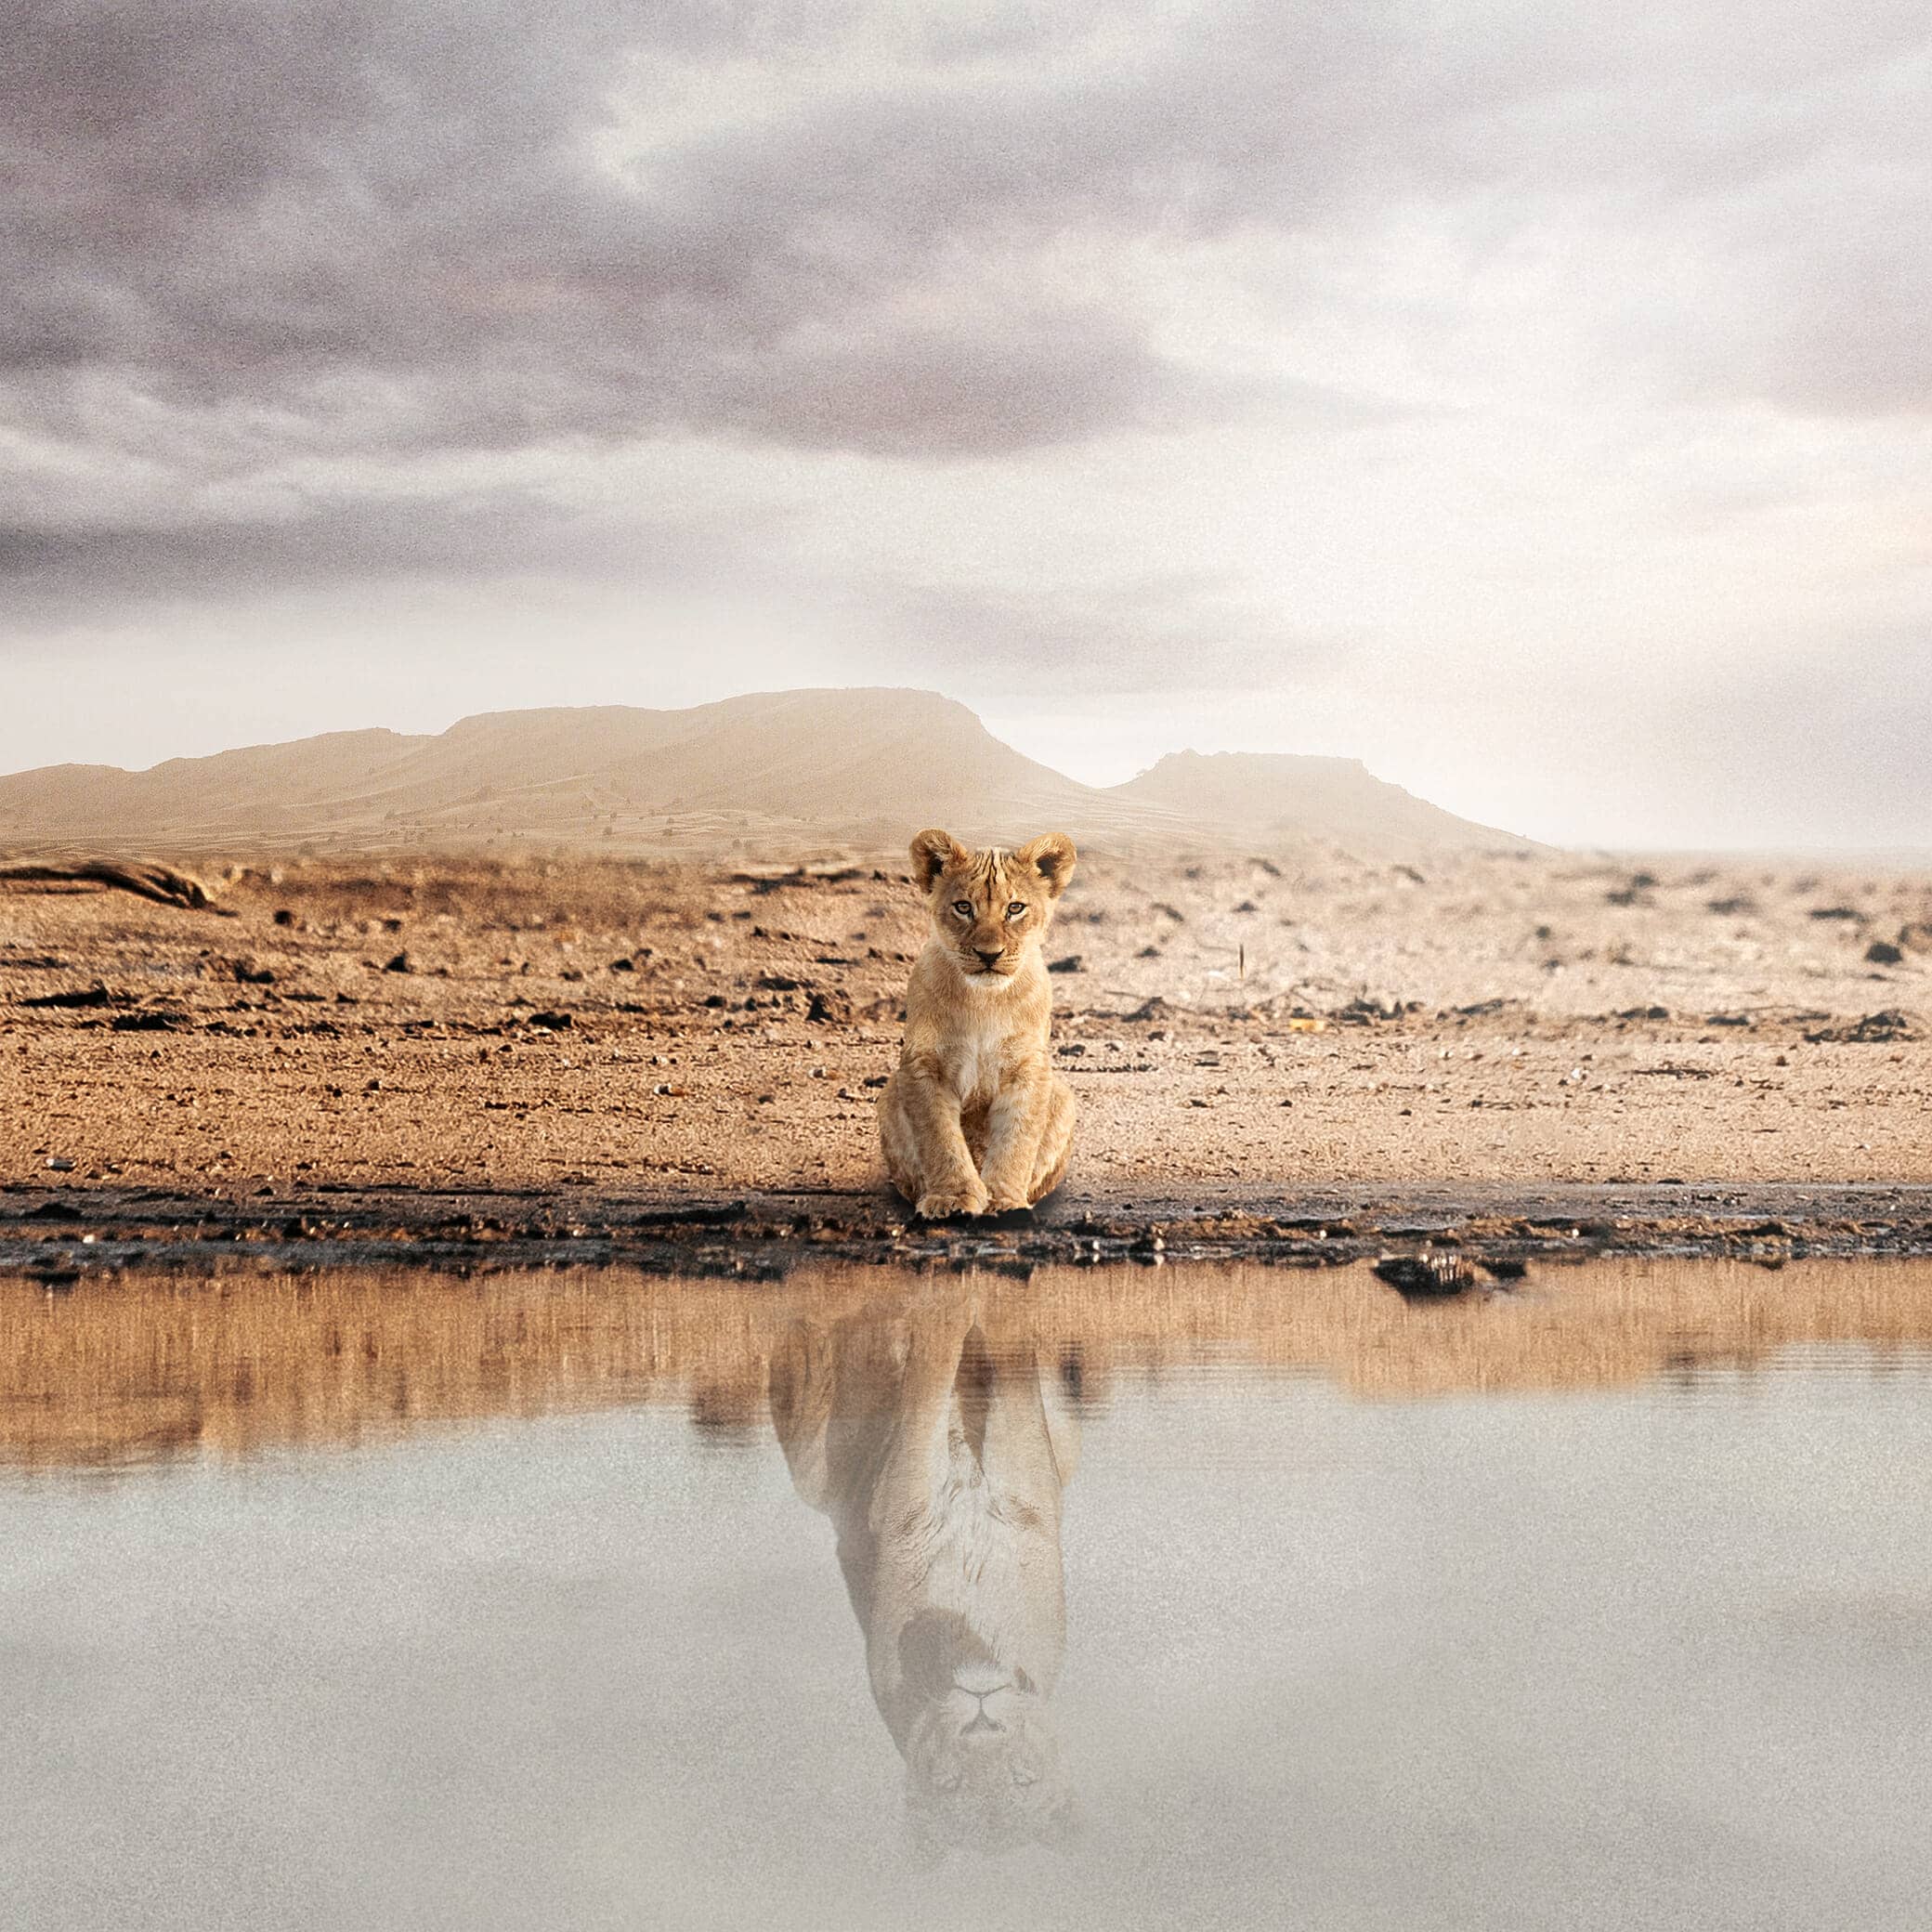 How to Create a Lion Reflection in the Water Photo Manipulation